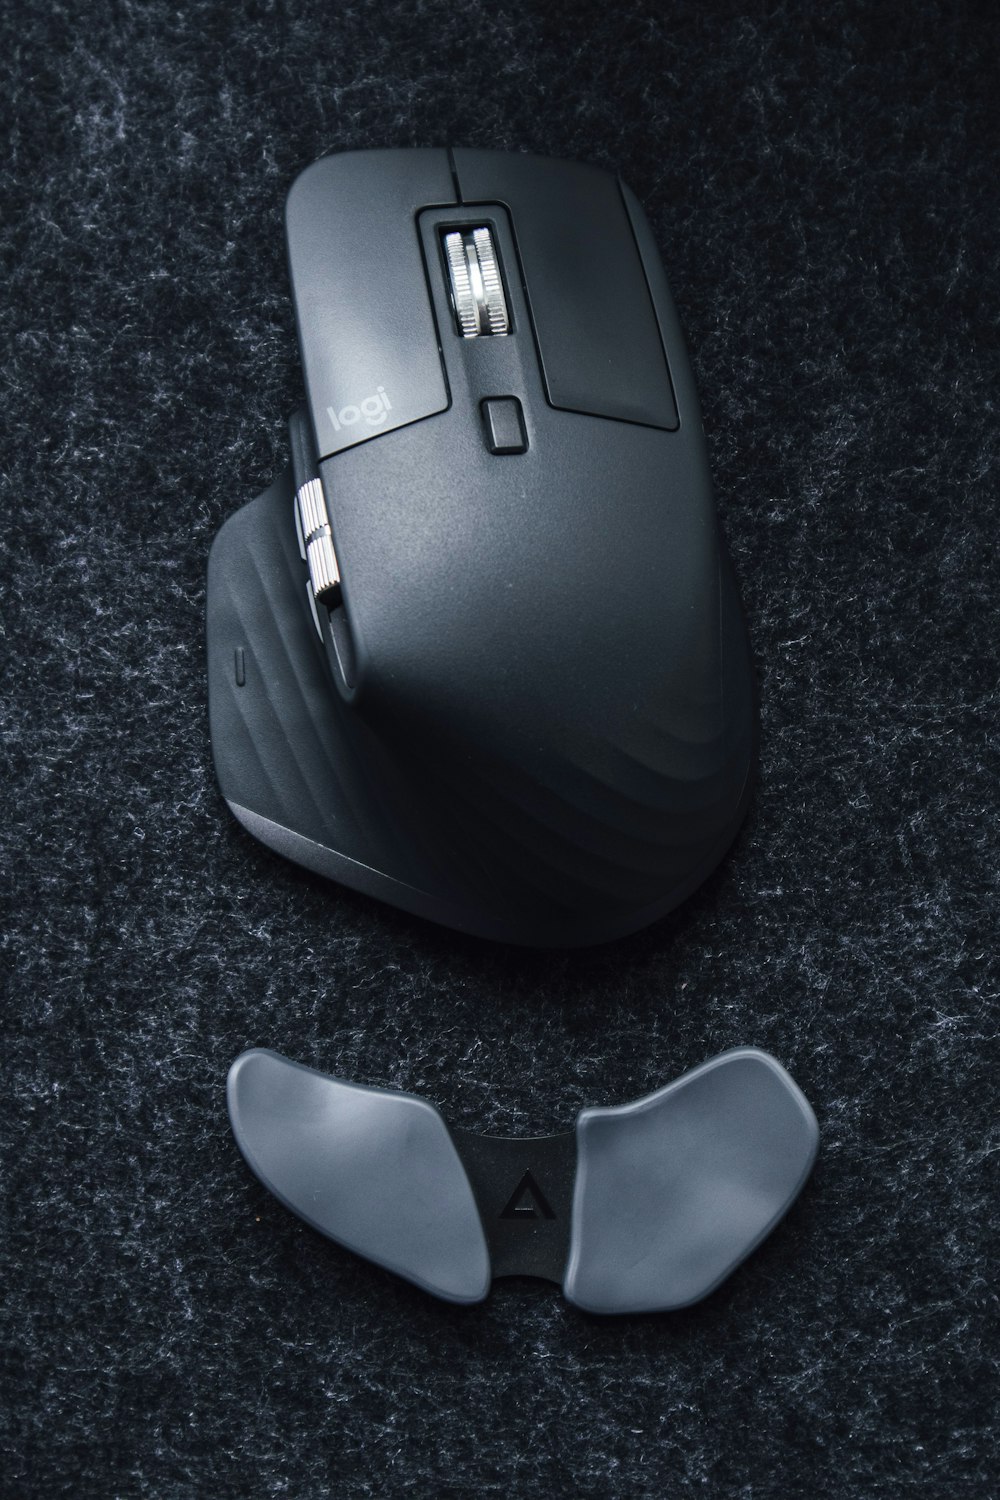 black and white cordless computer mouse